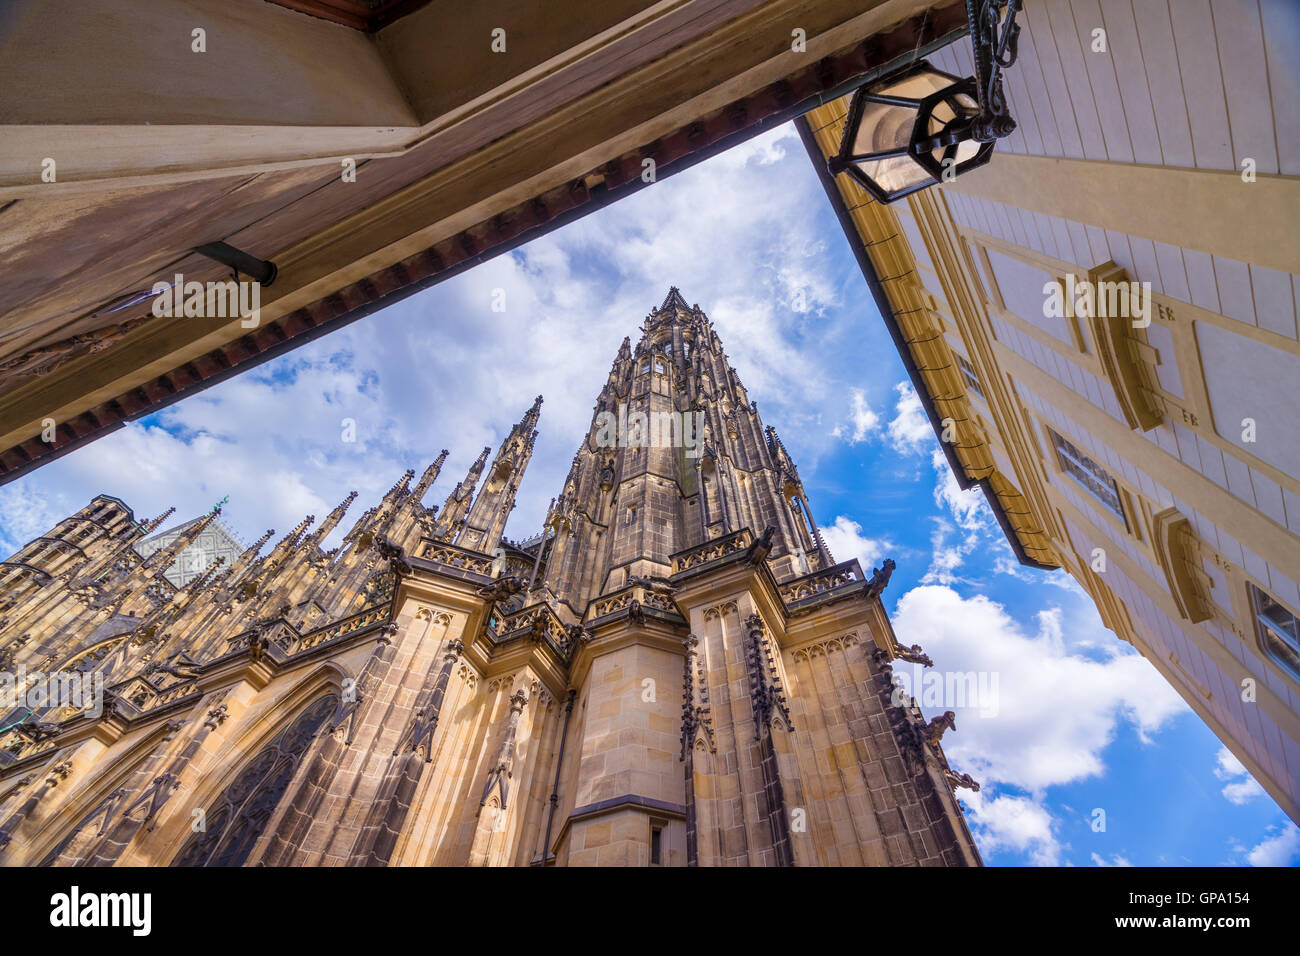 The St. Vitus Cathedral, Prague, is a beautiful example of Gothic architecture and is the biggest and most important church in t Stock Photo